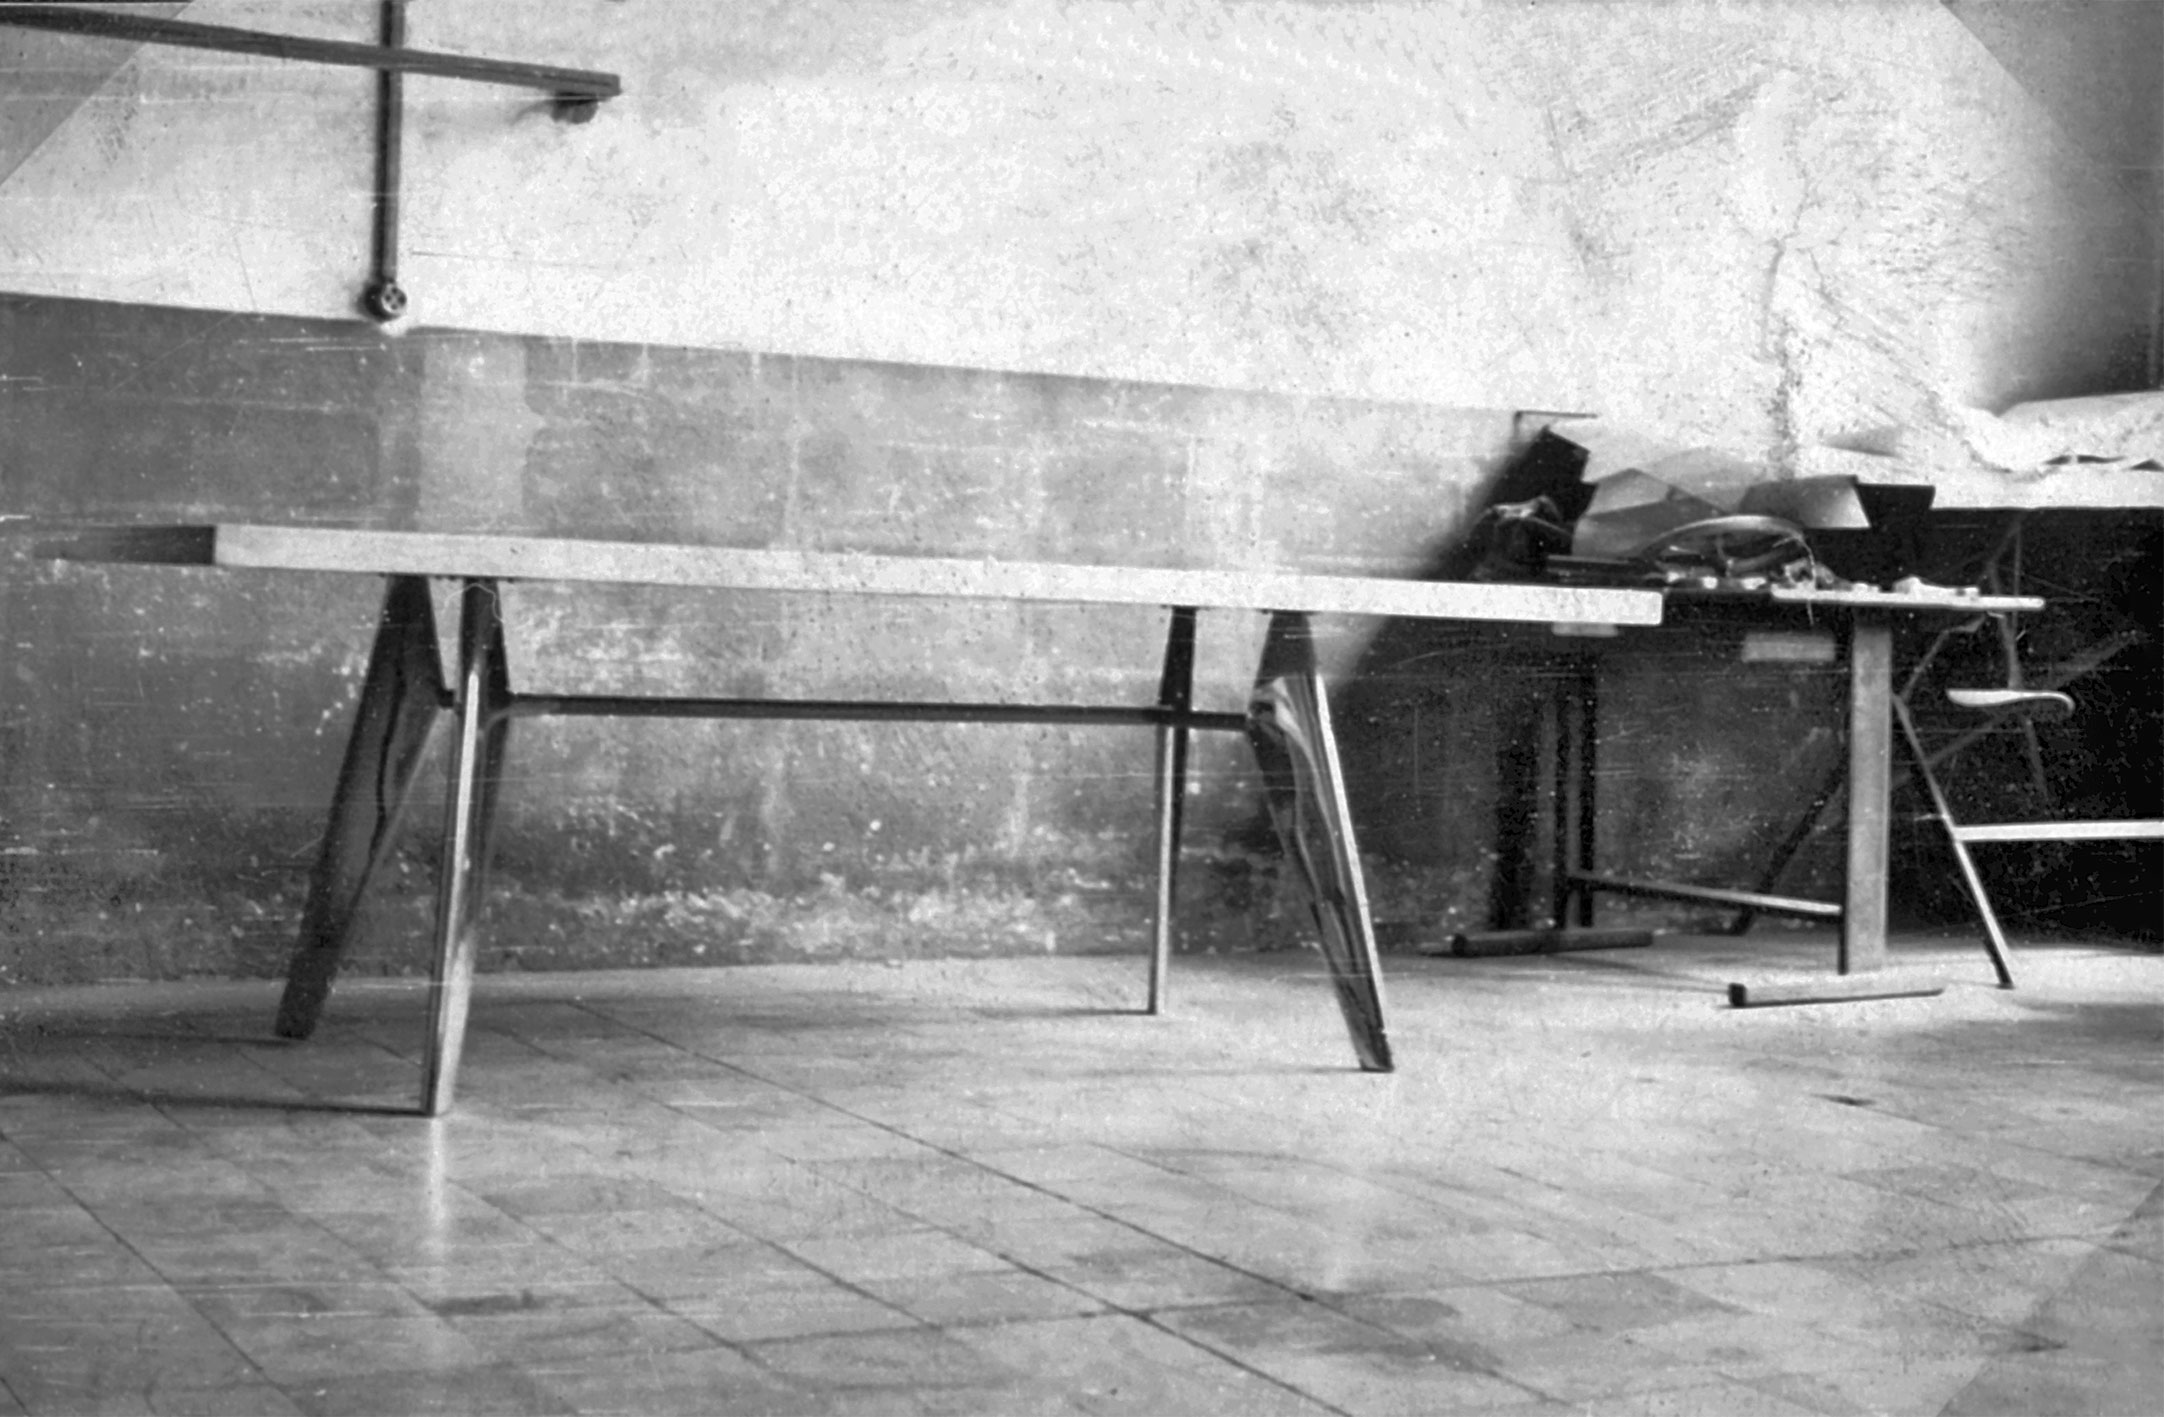 S.A.M. table with non-demountable metal legs. Prototype in the workshop, ca. 1951.